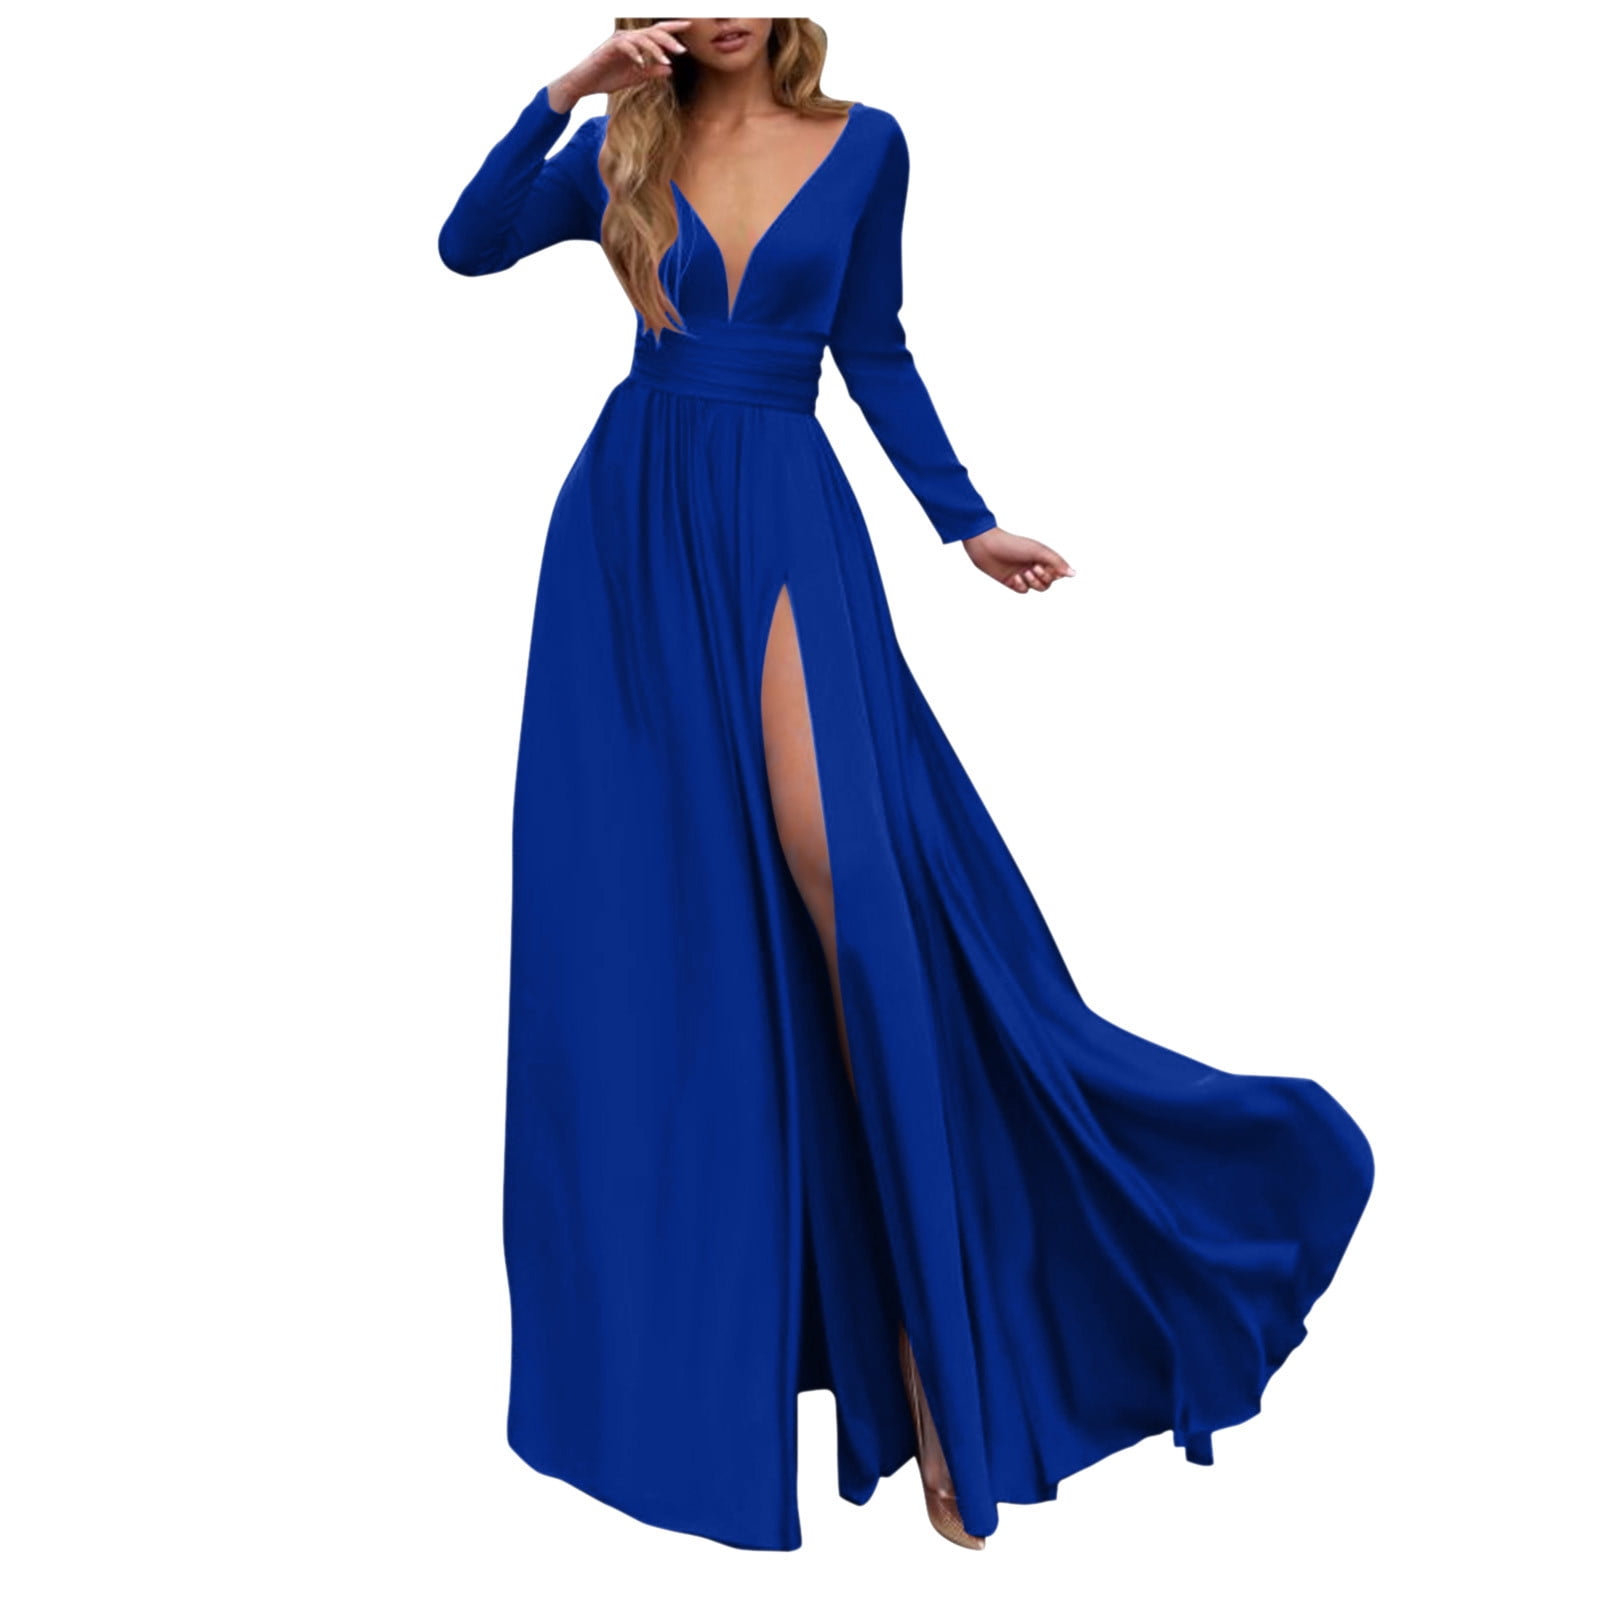 CAICJ98 Long Sleeve Dress For Women Wedding Guest Women's Off The Shoulder  A-line Beaded Satin Prom Dress Long Evening Ball Gown with Pockets Blue,L